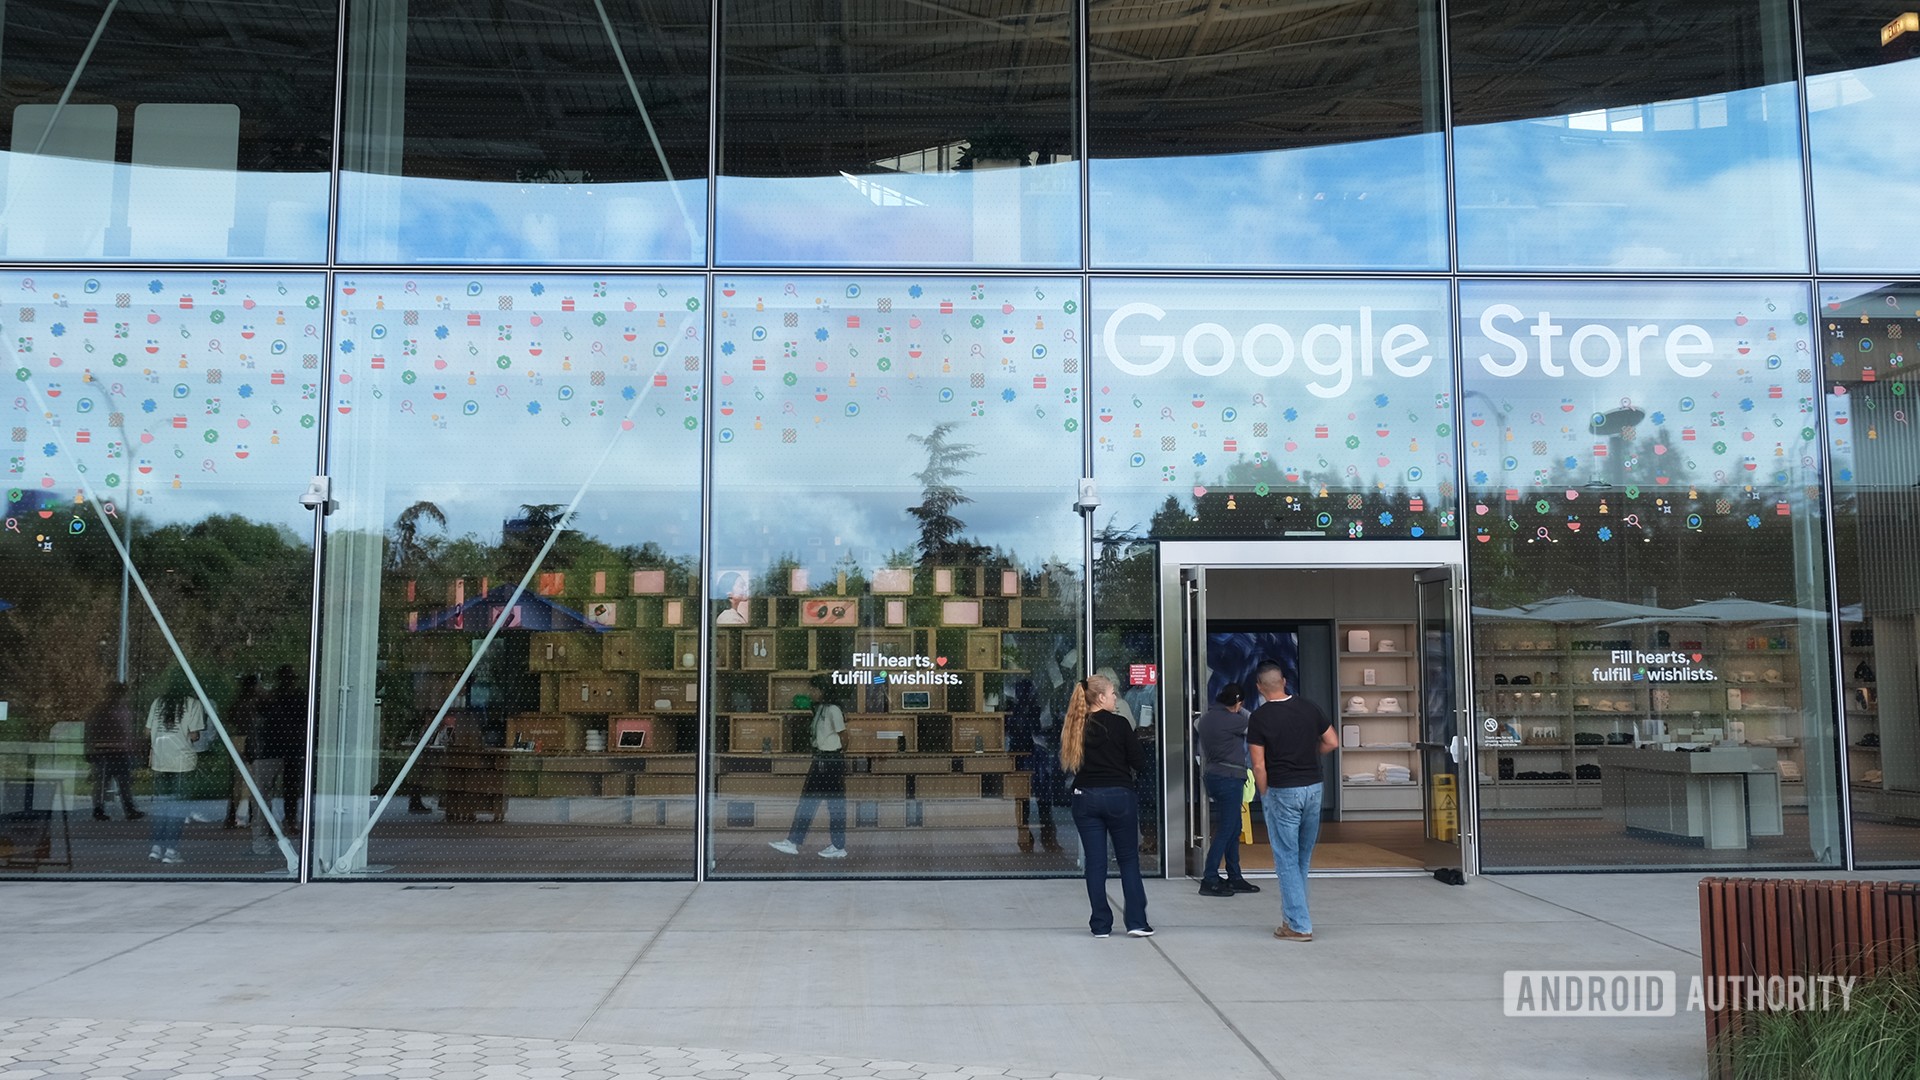 Google Store exterior with mountain view